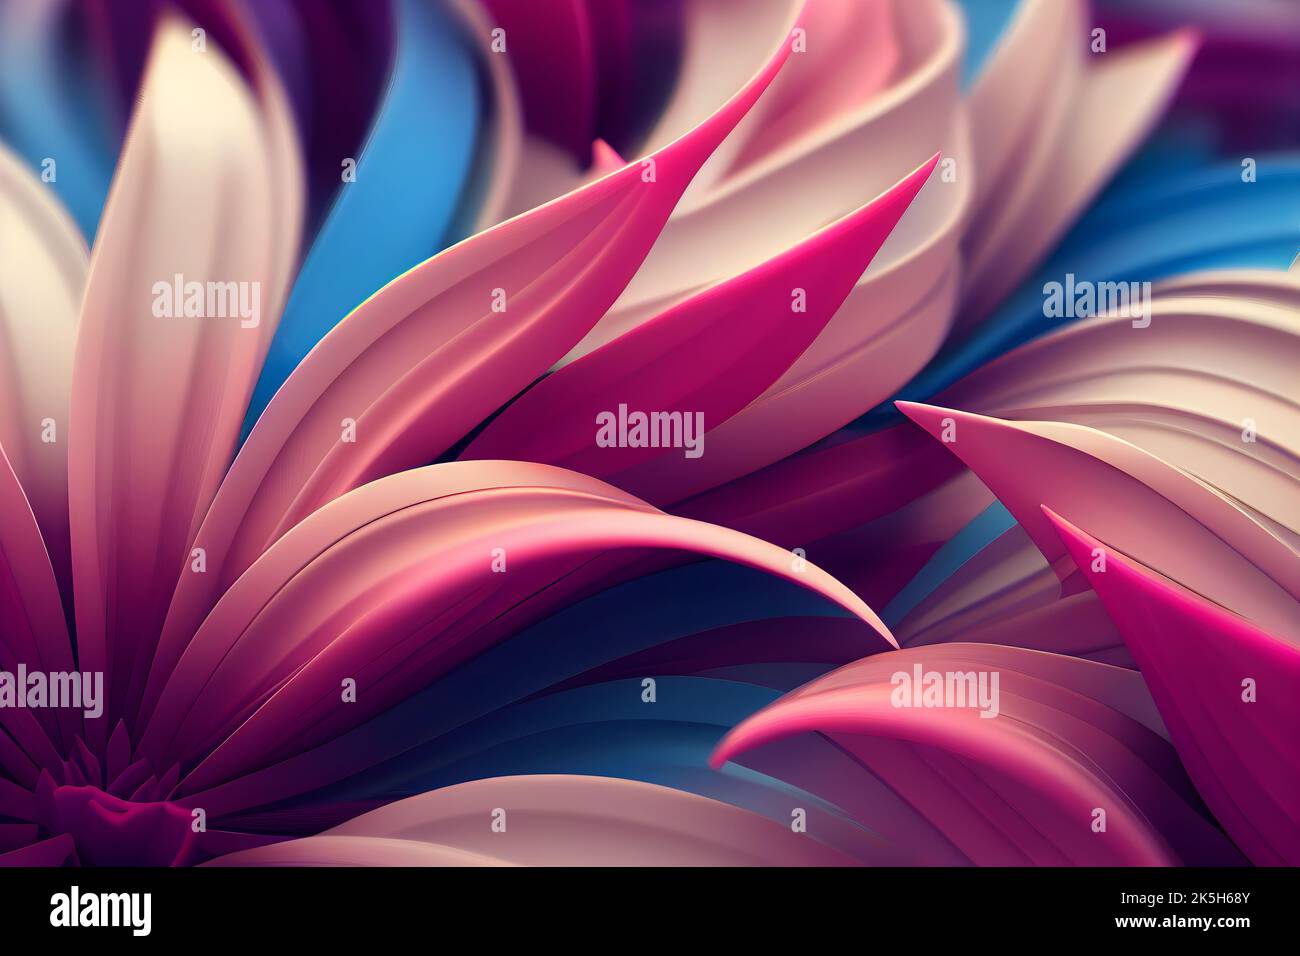 Abstract flower background, multicolored. 3D render. Stock Photo